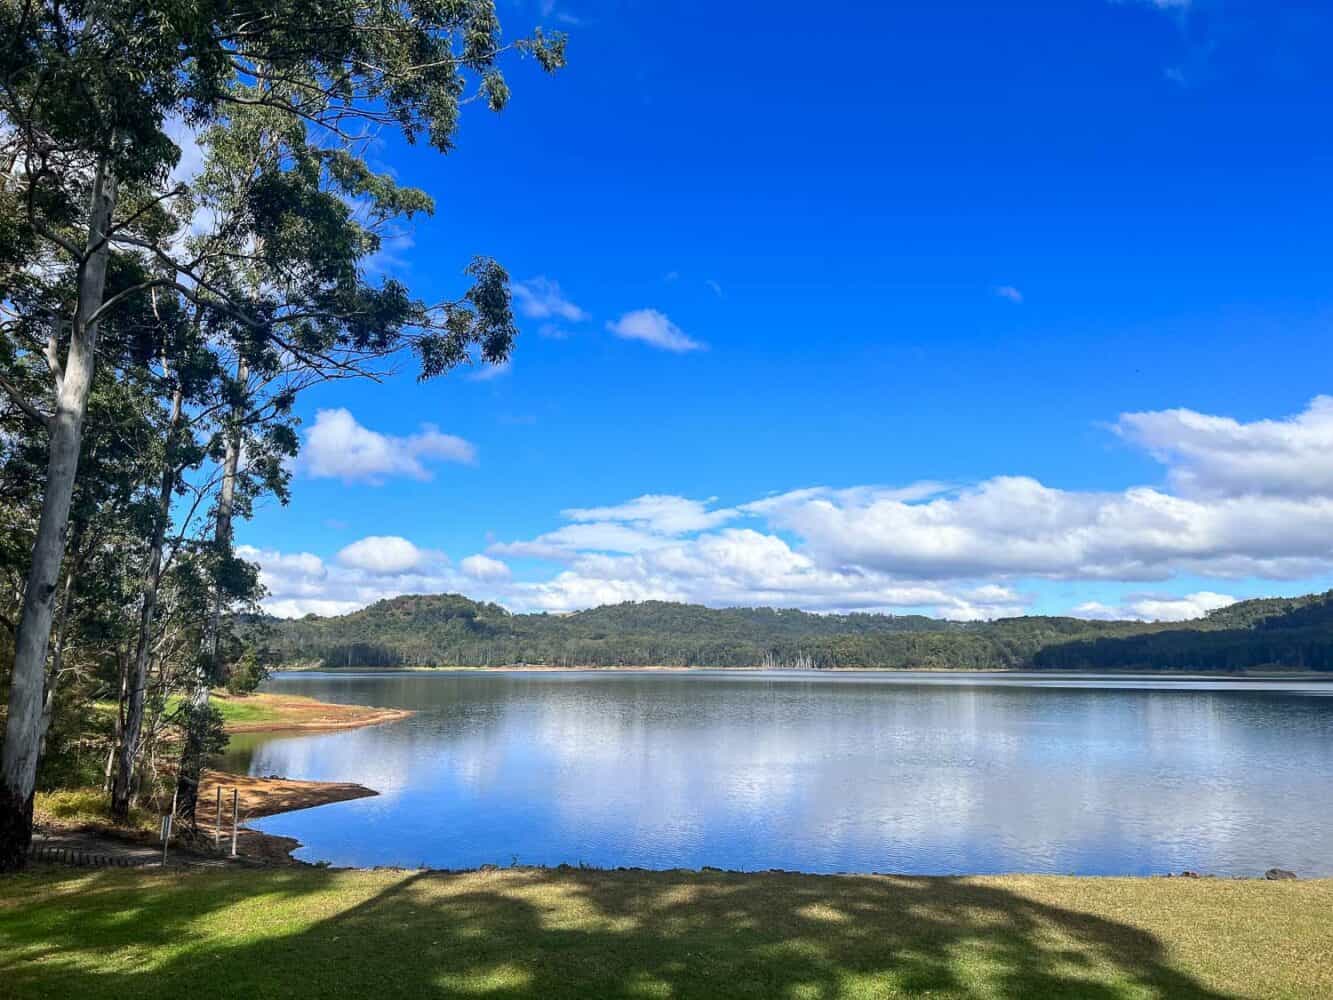 Lake Baroon on a sunny day and reflections in the water, Sunshine Coast Hinterland, Queensland, Australia